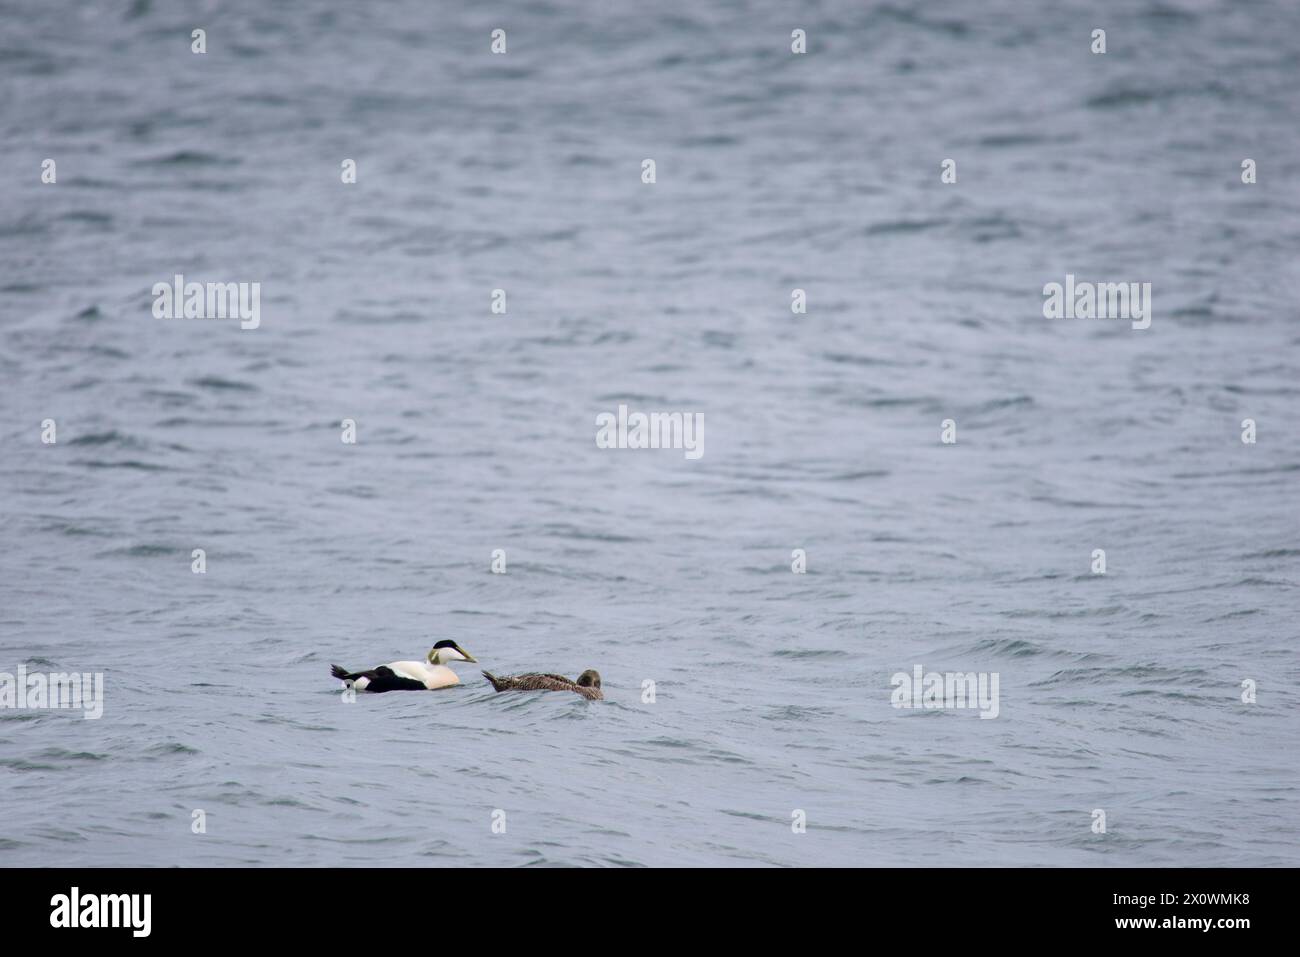 This serene stock image showcases a male and female eider duck, Somateria mollissima, gently floating on the tranquil waters of the Baltic Sea. With n Stock Photo